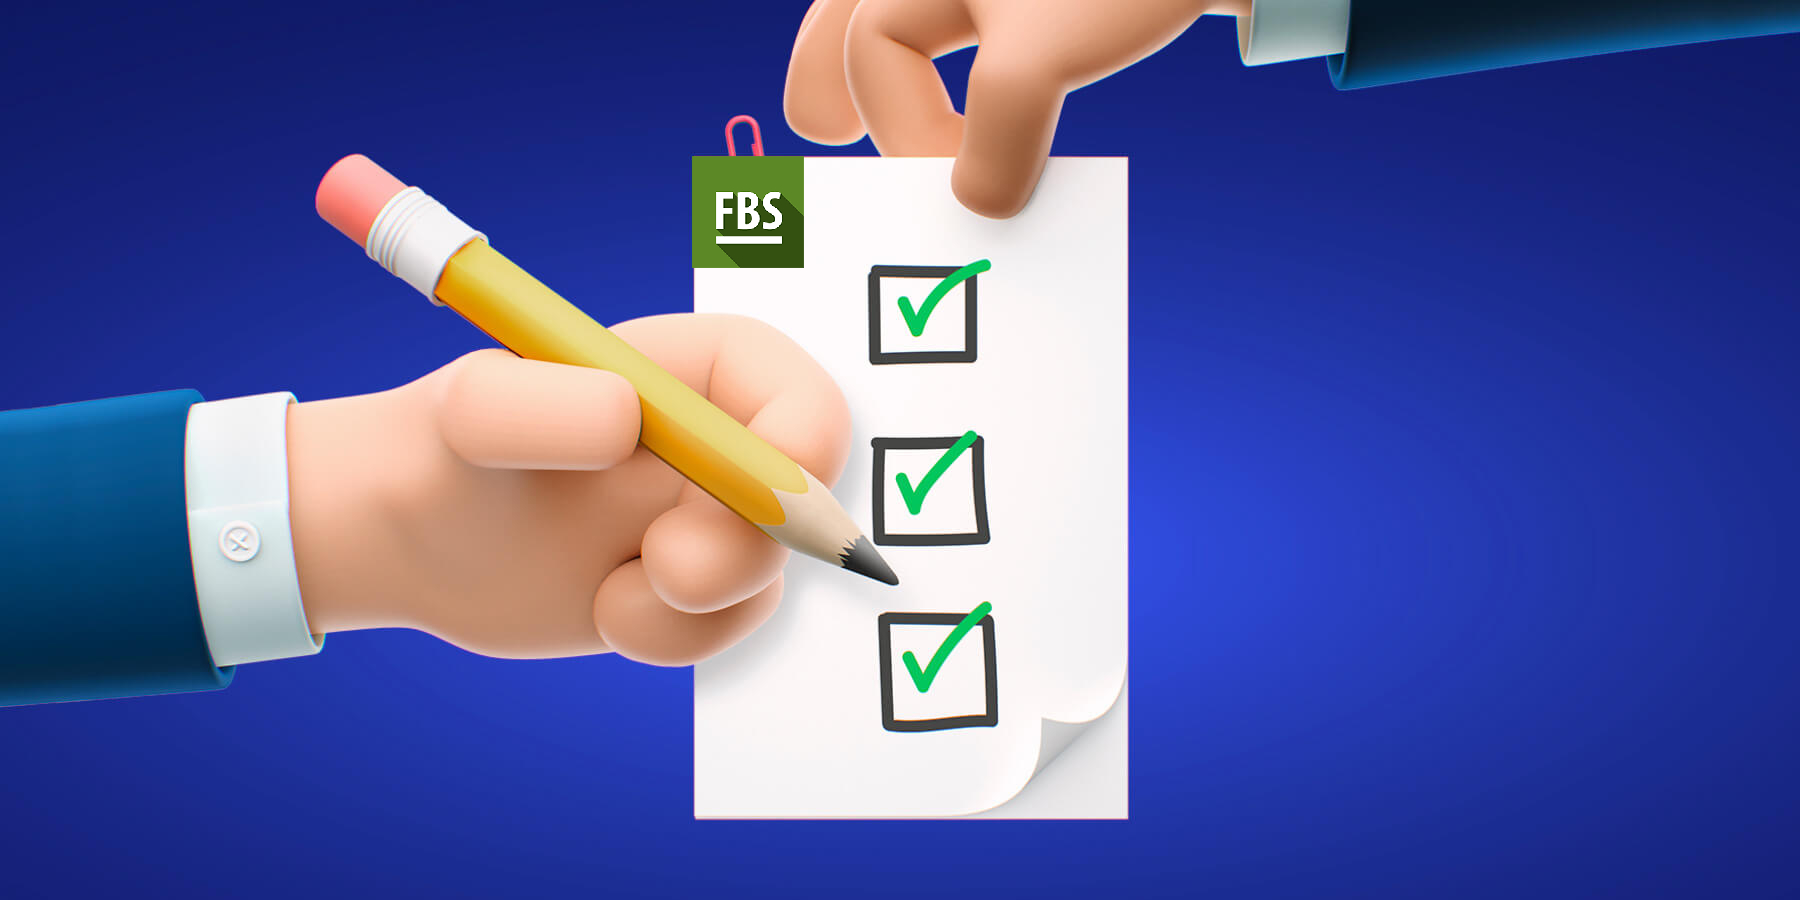 How can I Verify my Account at FBS? - Frequently Asked Questions